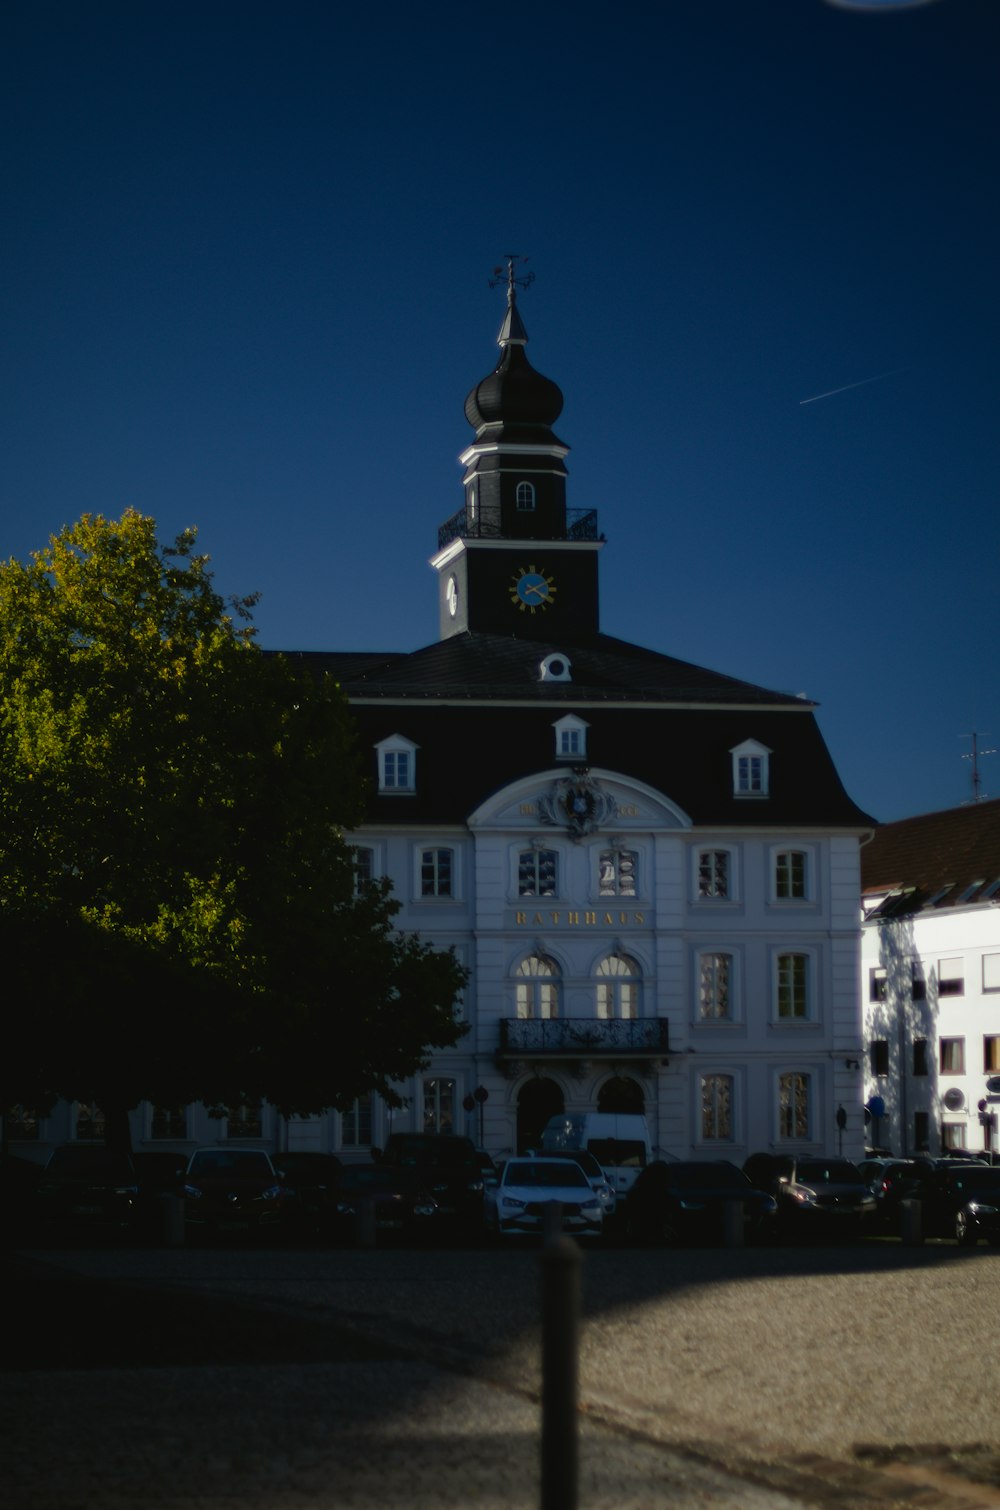 a large white building with a clock tower